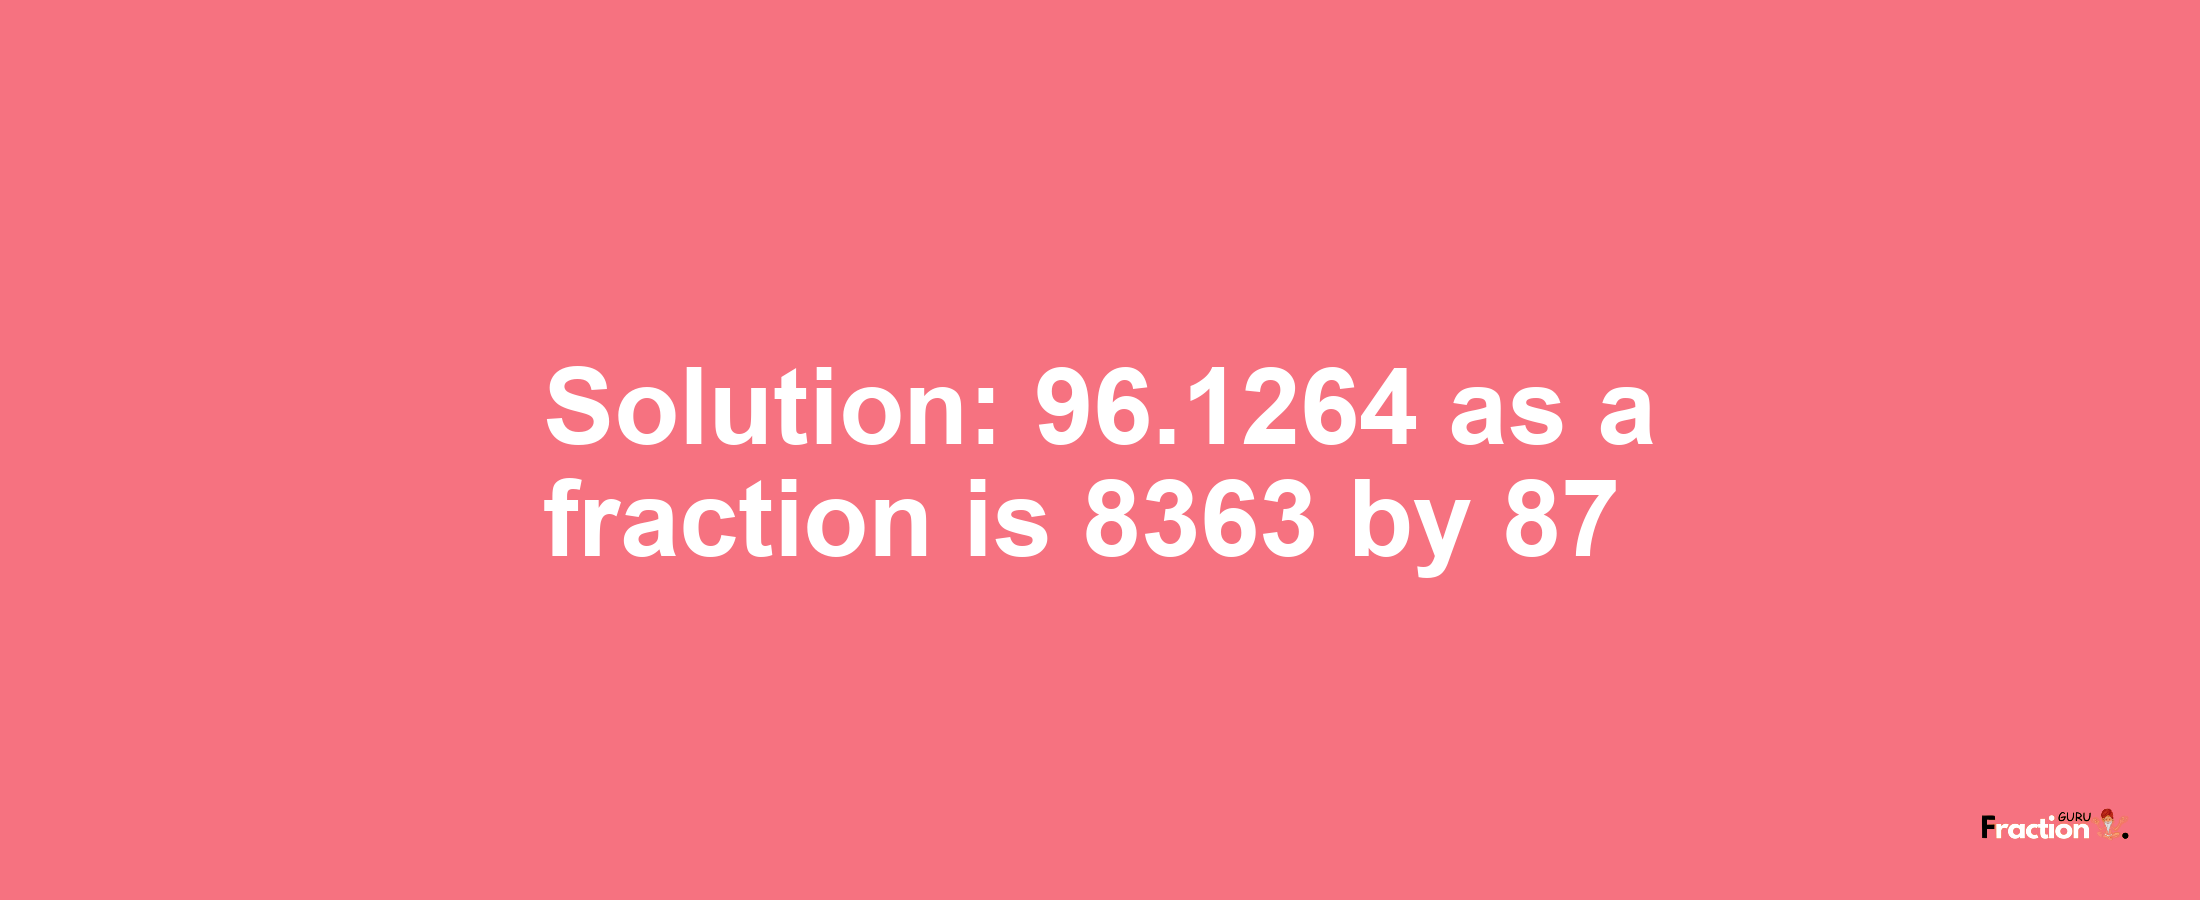 Solution:96.1264 as a fraction is 8363/87